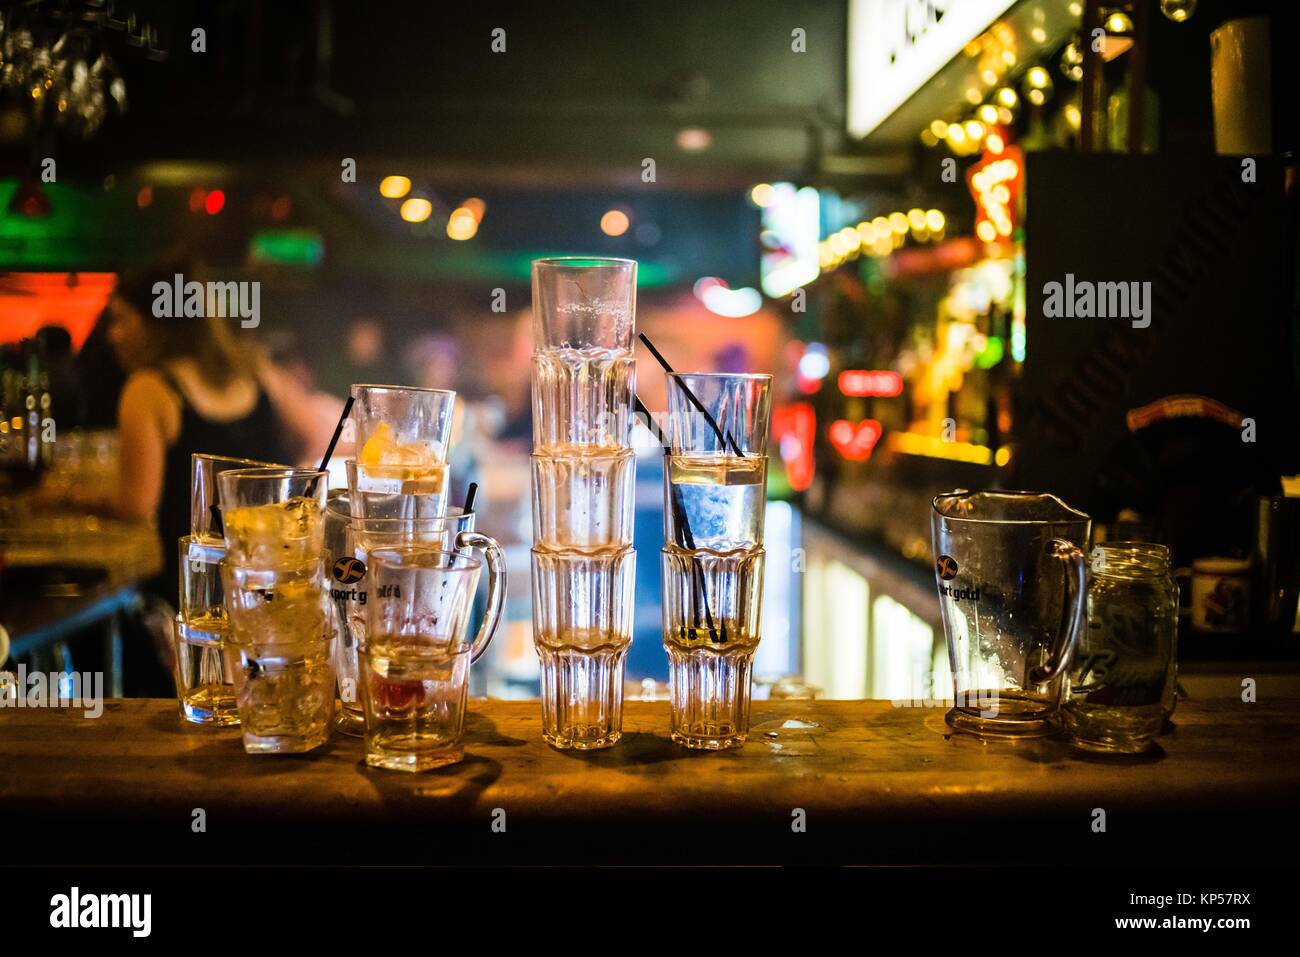 Empty glasses on a bar counter. Stock Photo